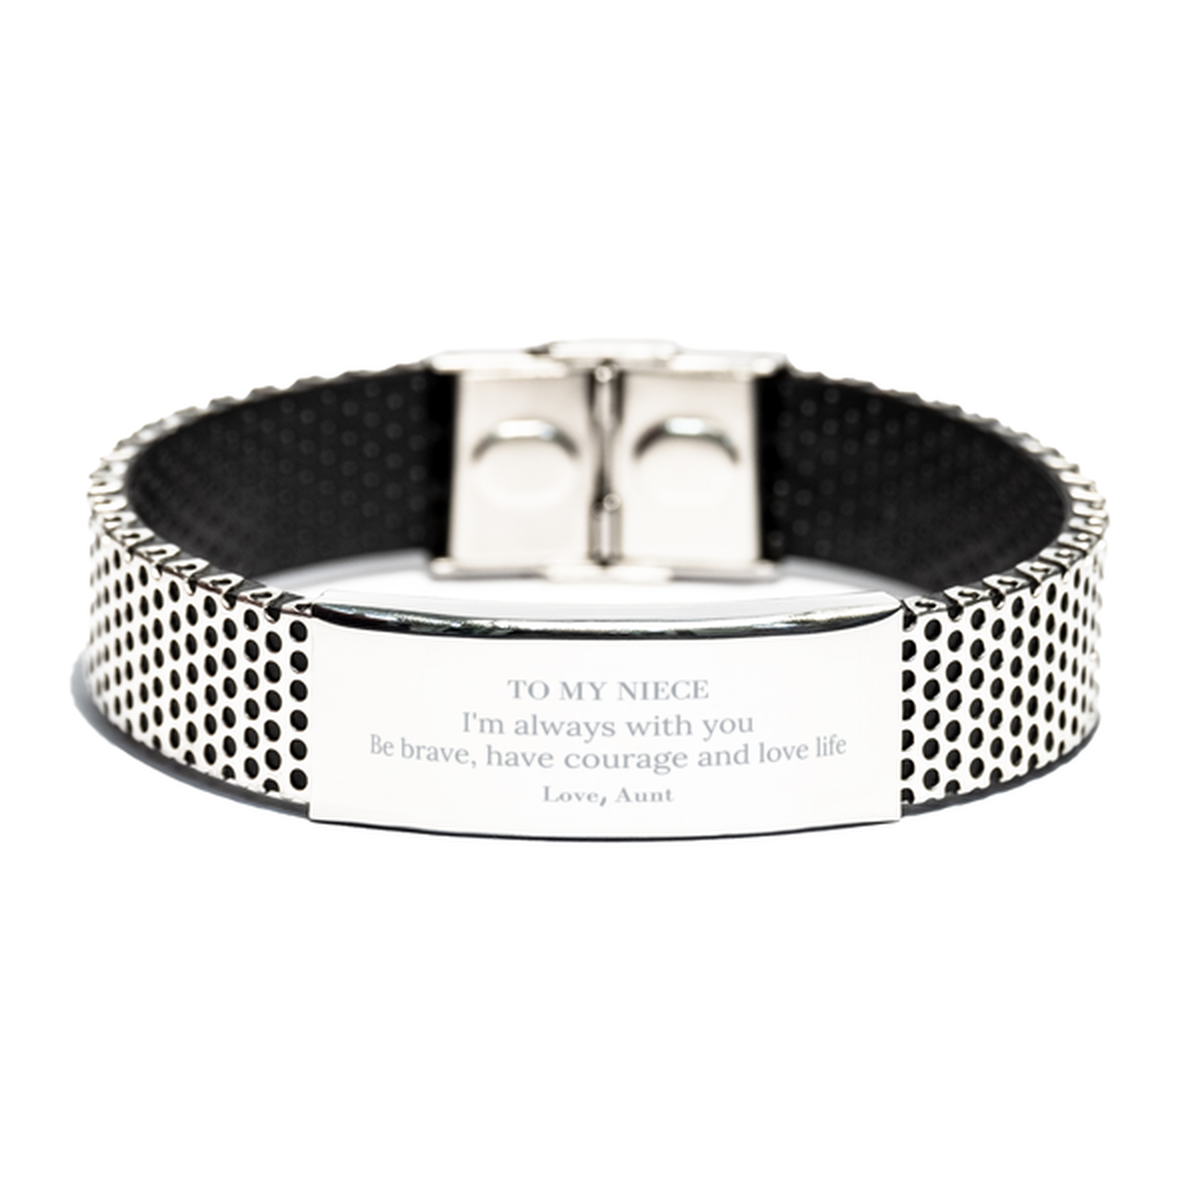 To My Niece Gifts from Aunt, Unique Stainless Steel Bracelet Inspirational Christmas Birthday Graduation Gifts for Niece I'm always with you. Be brave, have courage and love life. Love, Aunt